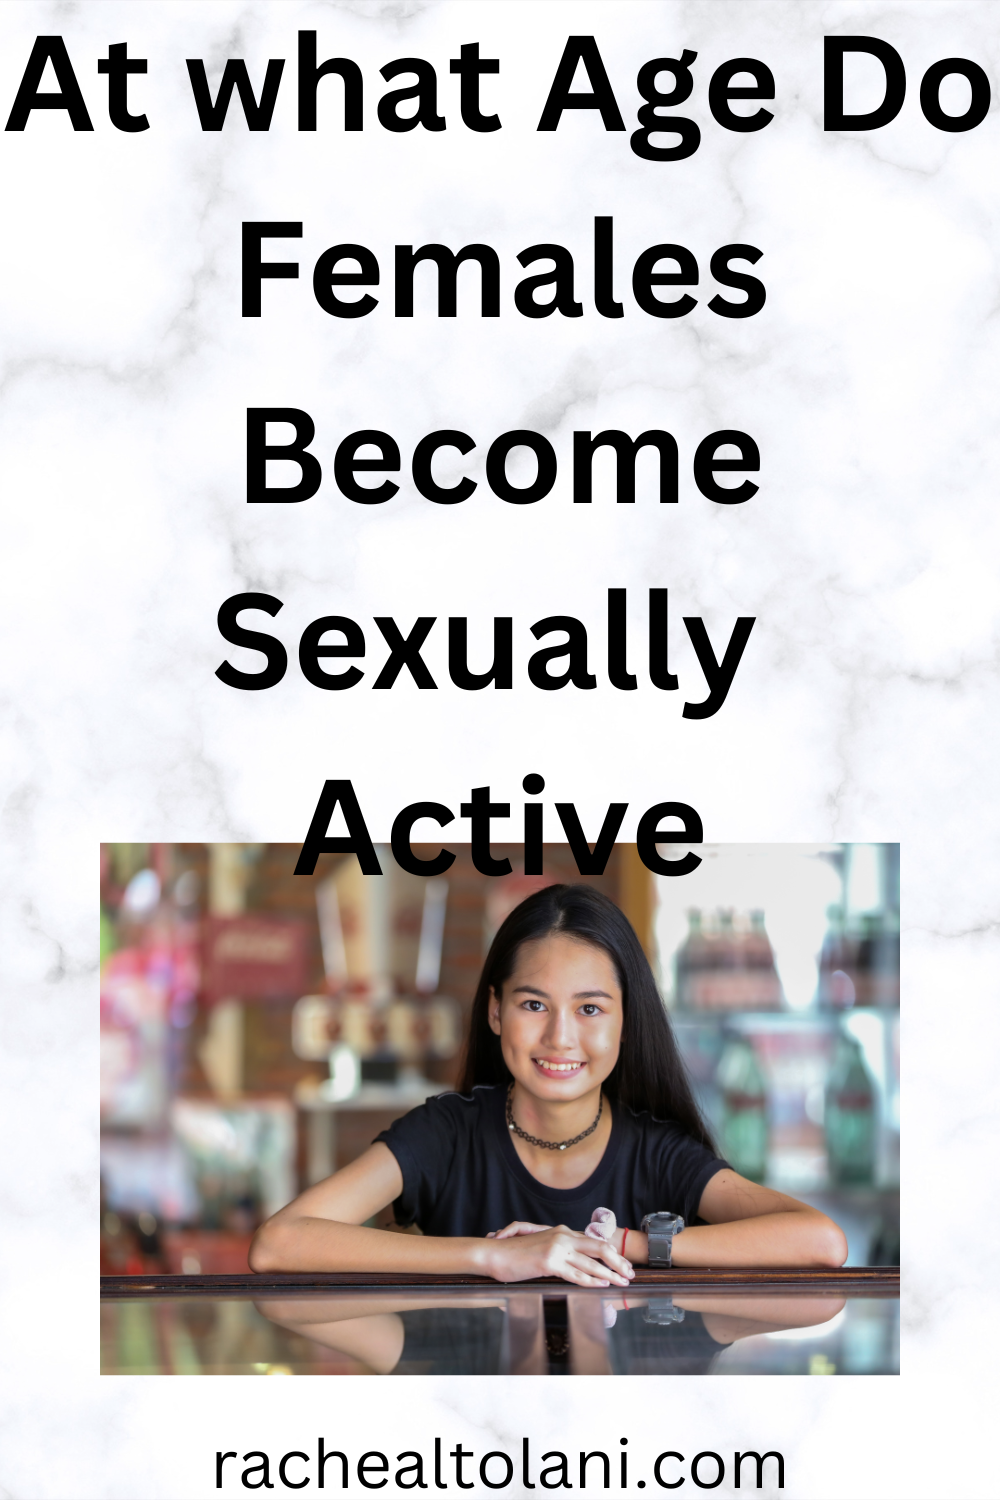 At what age do females become sexually active